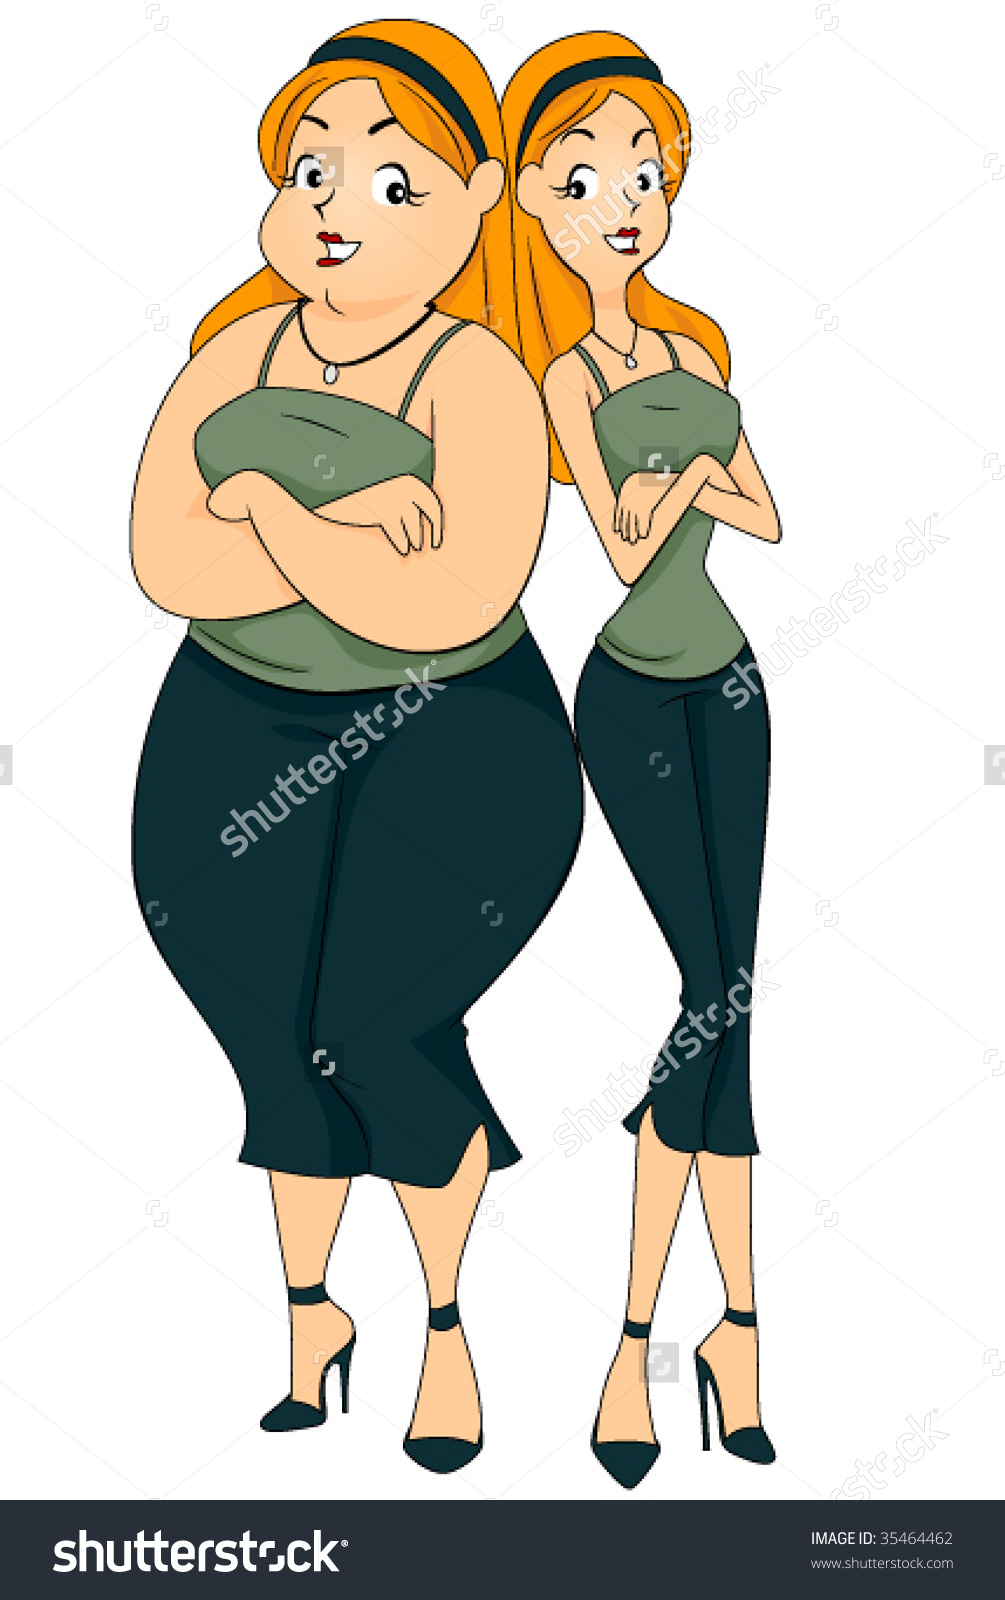 Showing post & media for Fat and thin cartoon.